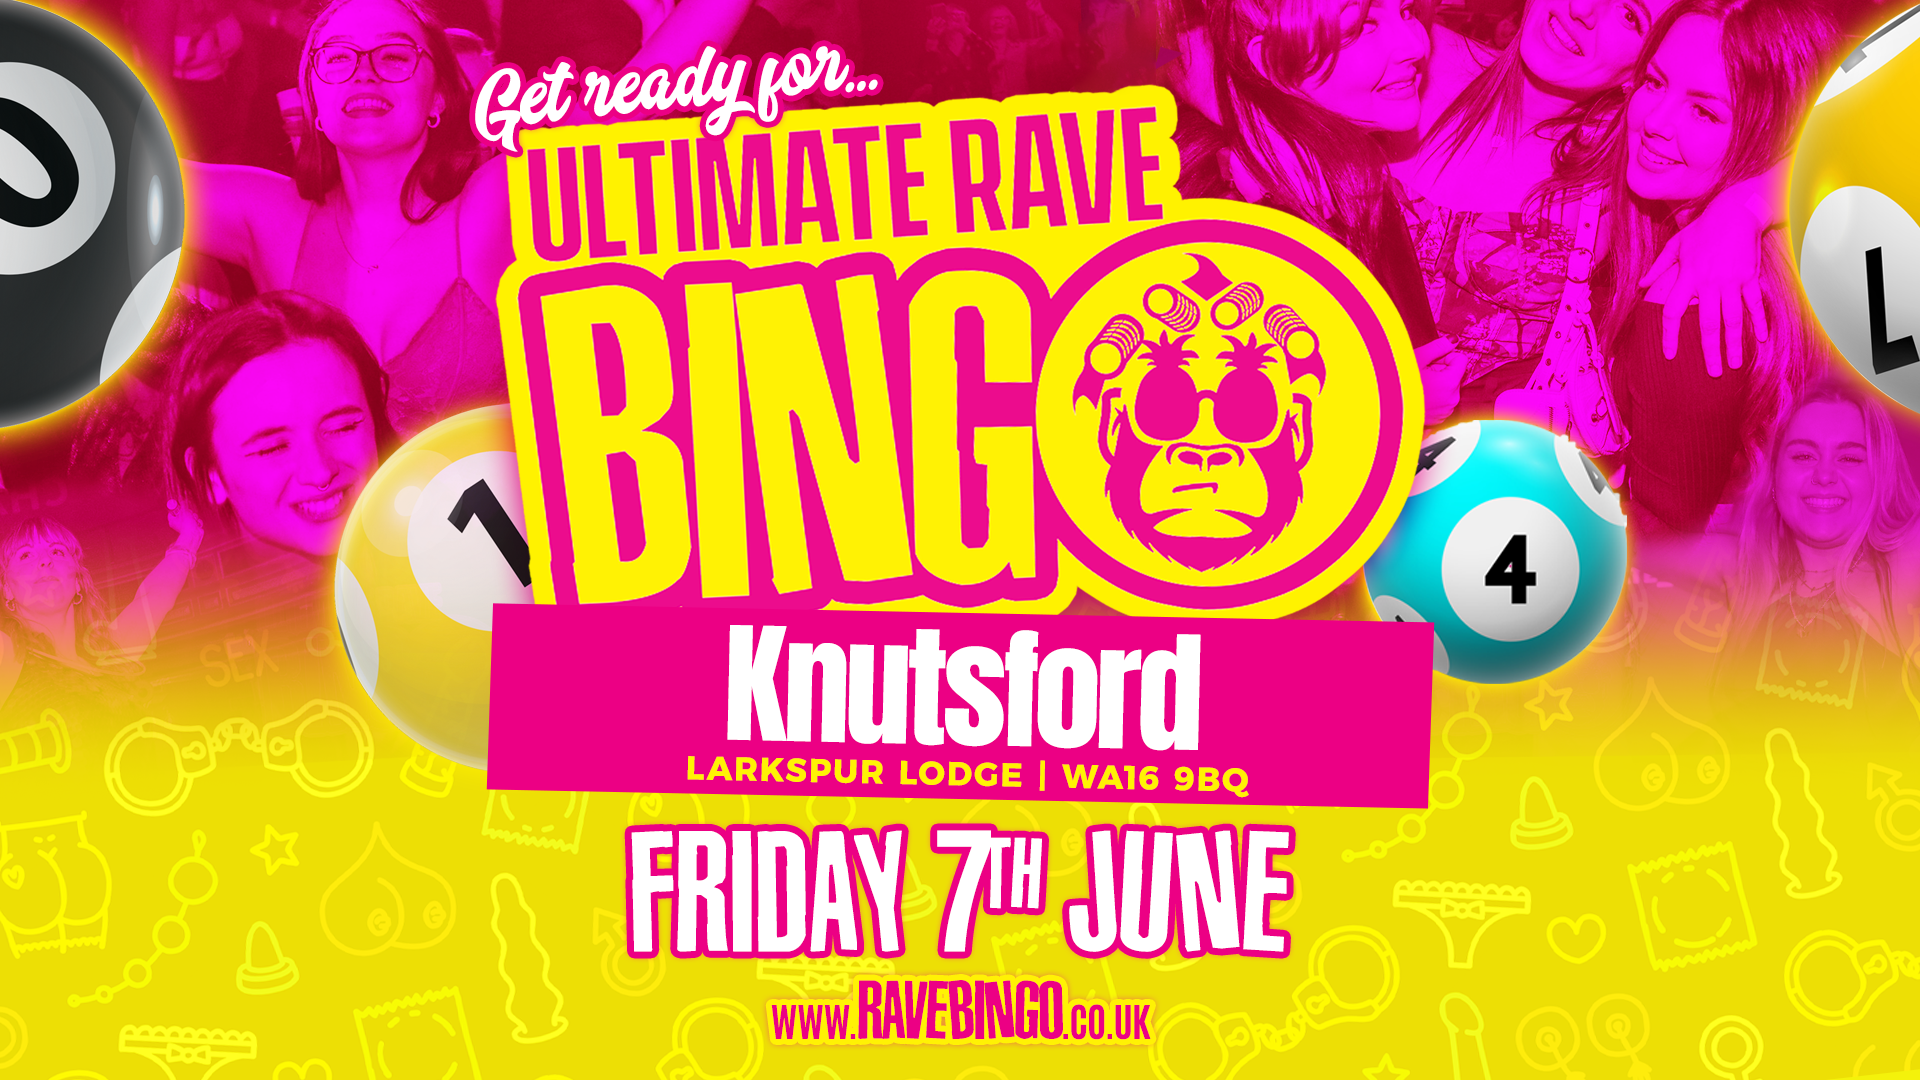 Ultimate Rave Bingo // Knutsford // Friday 7th June